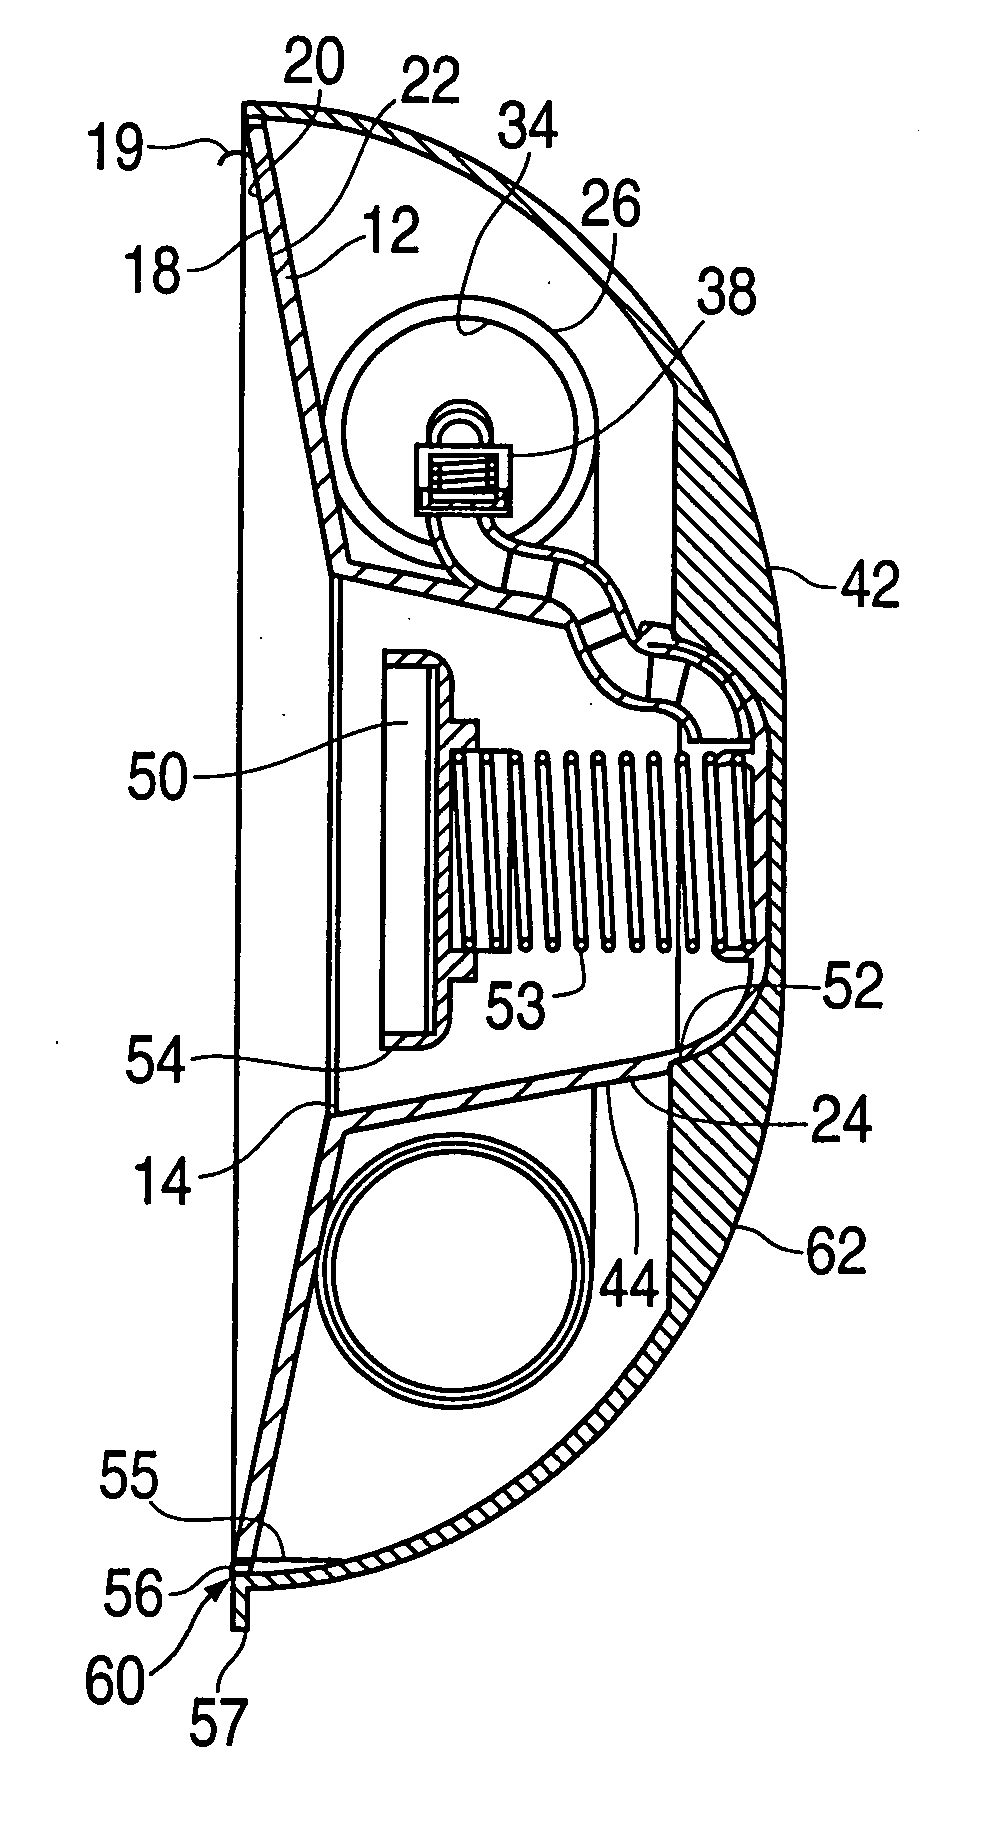 Device for non-surgical correction of congenital inverted nipples and/or collection of nipple aspirate fluid